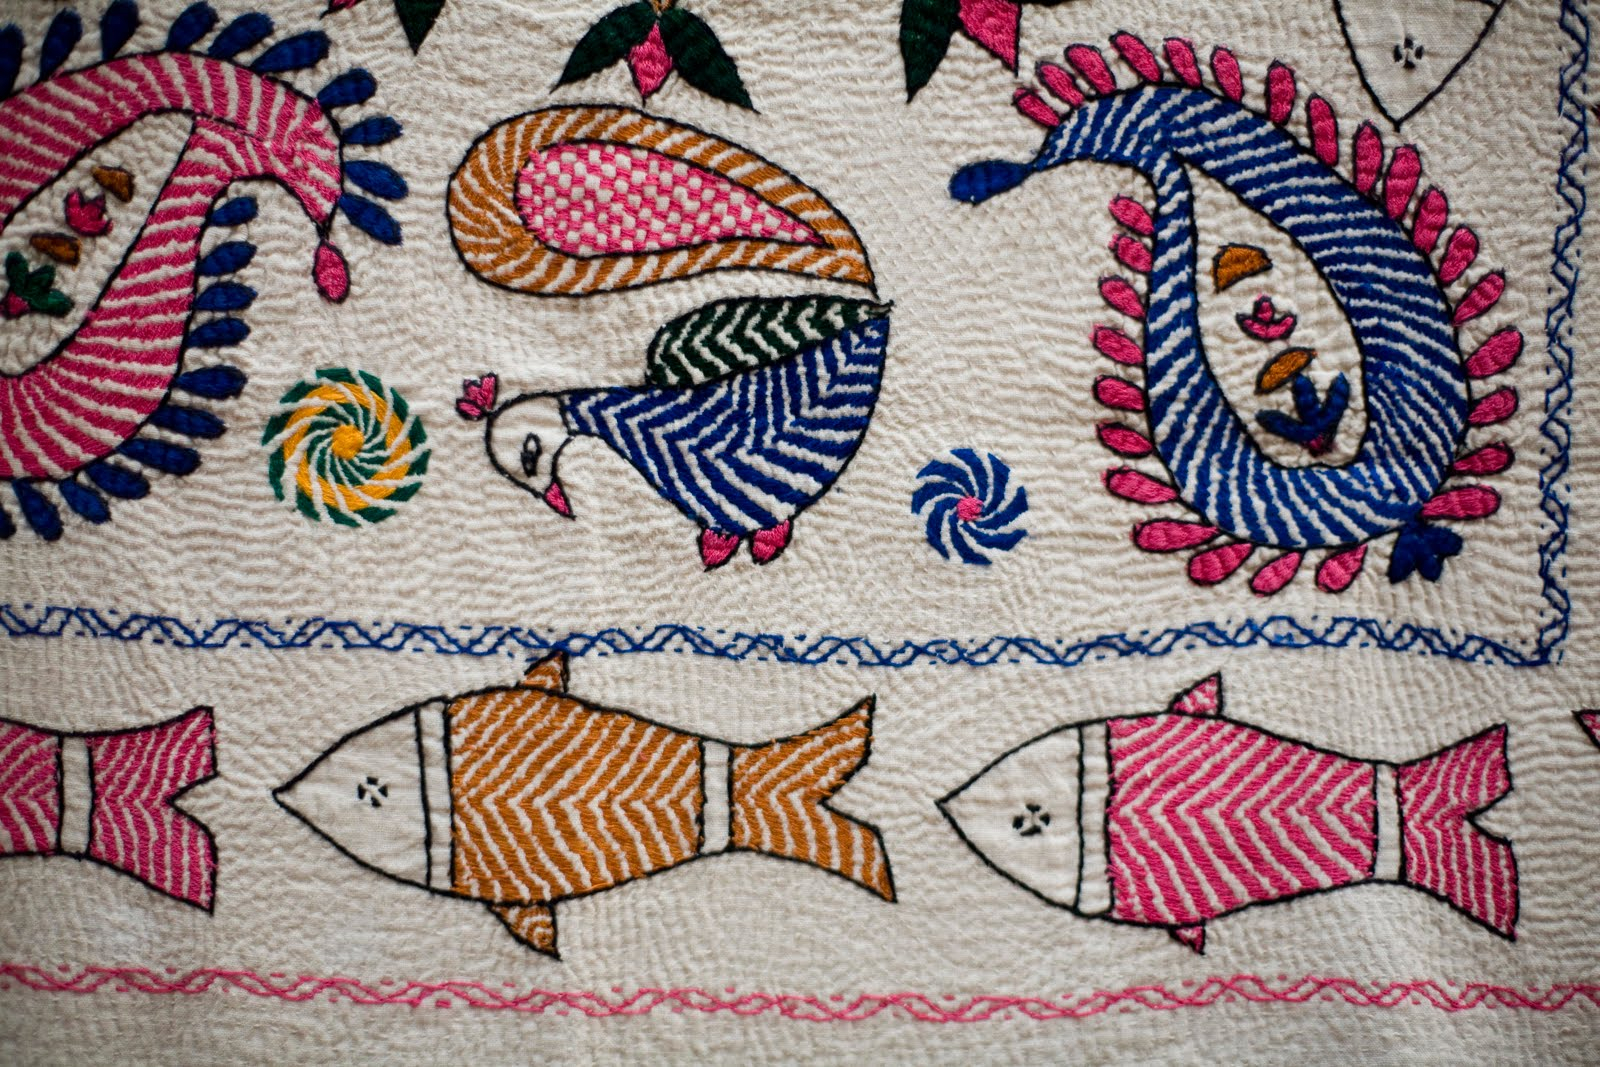 Kantha Work Embroidery Patterns Kantha Traditional Embroidery From India Nidhi Saxenas Blog